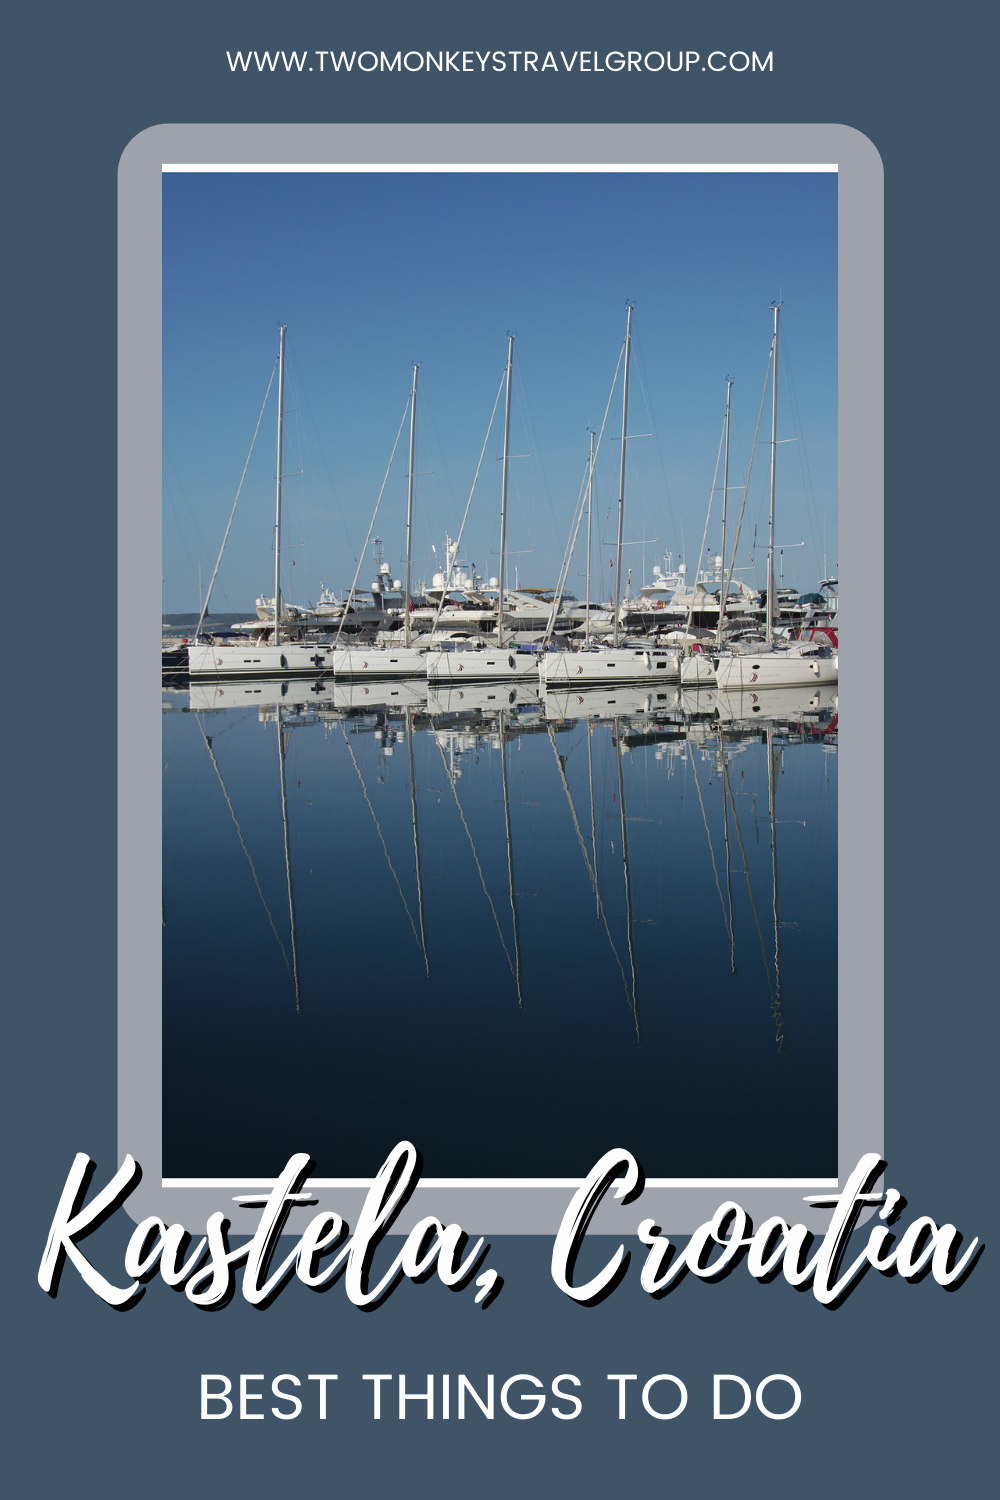 7 Best Things to do in Kastela, Croatia [with Suggested Tours]